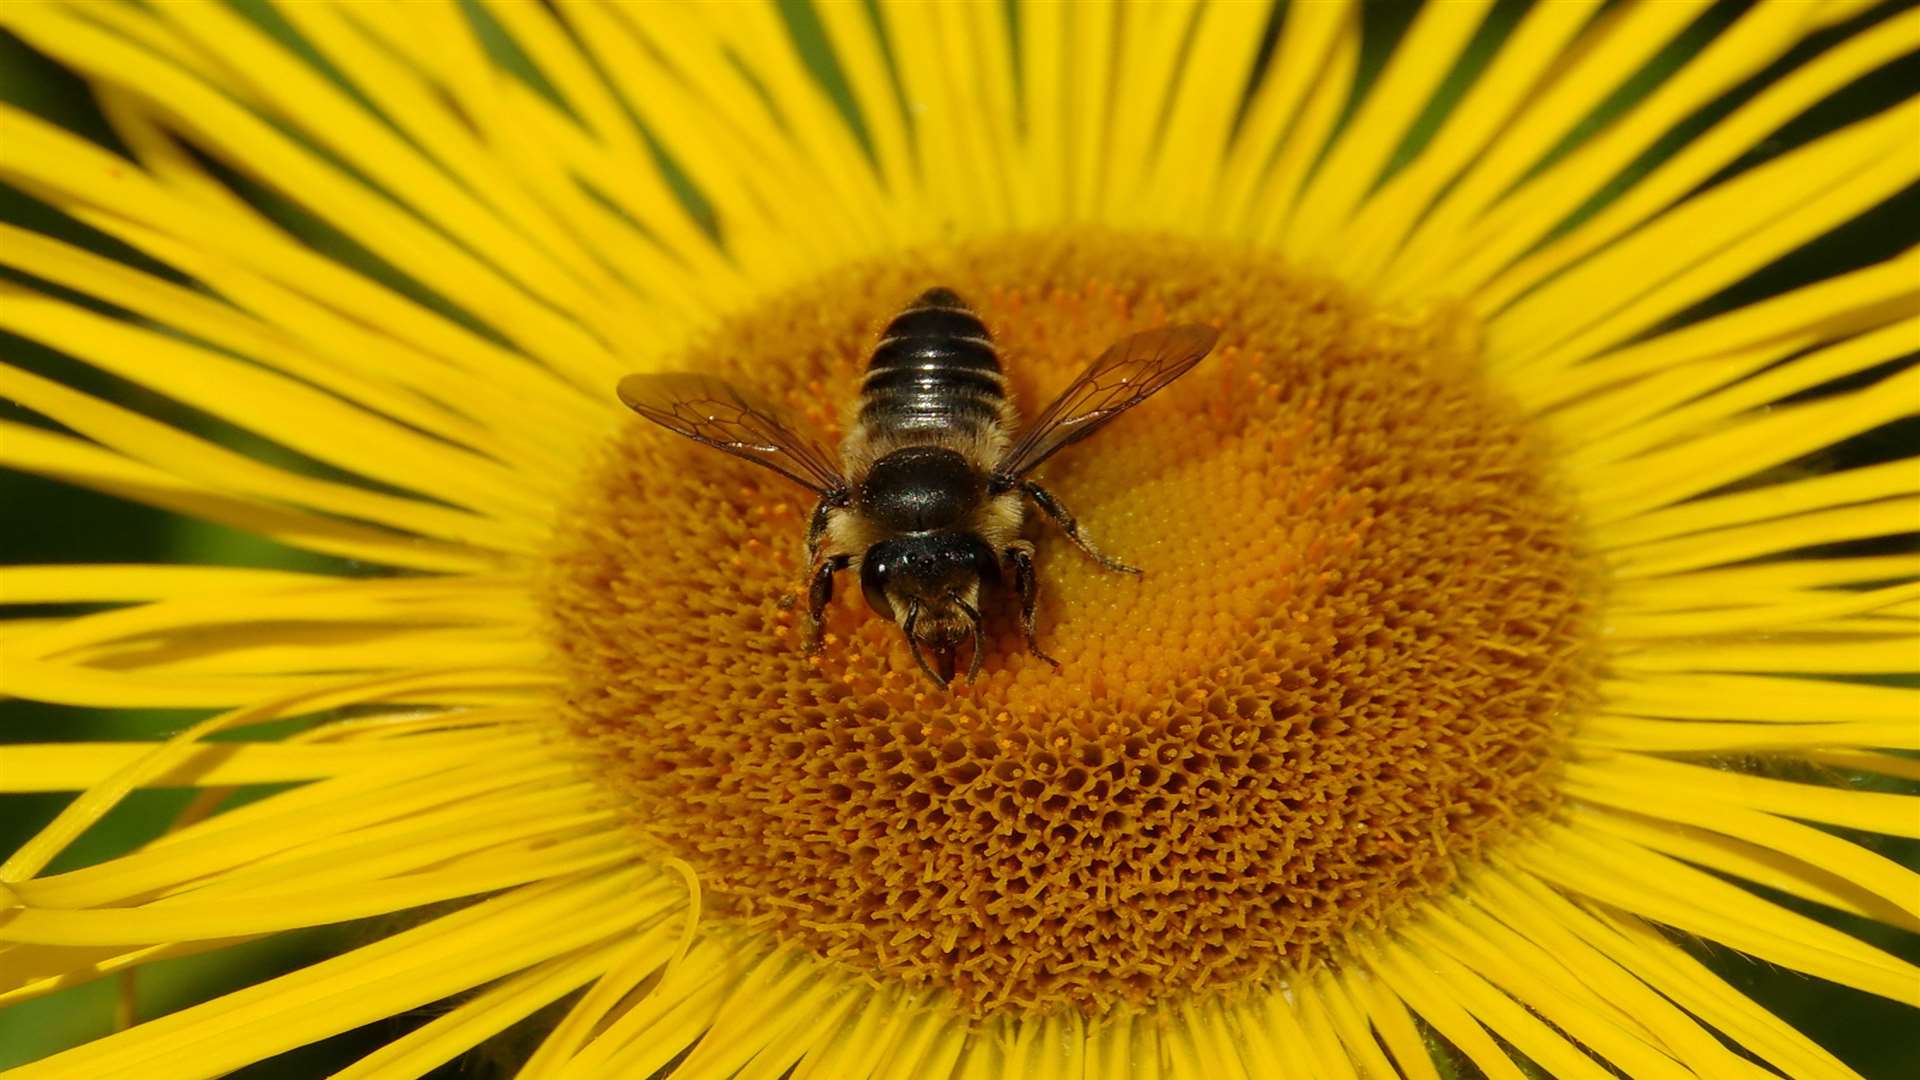 A leafcutter bee on a flower